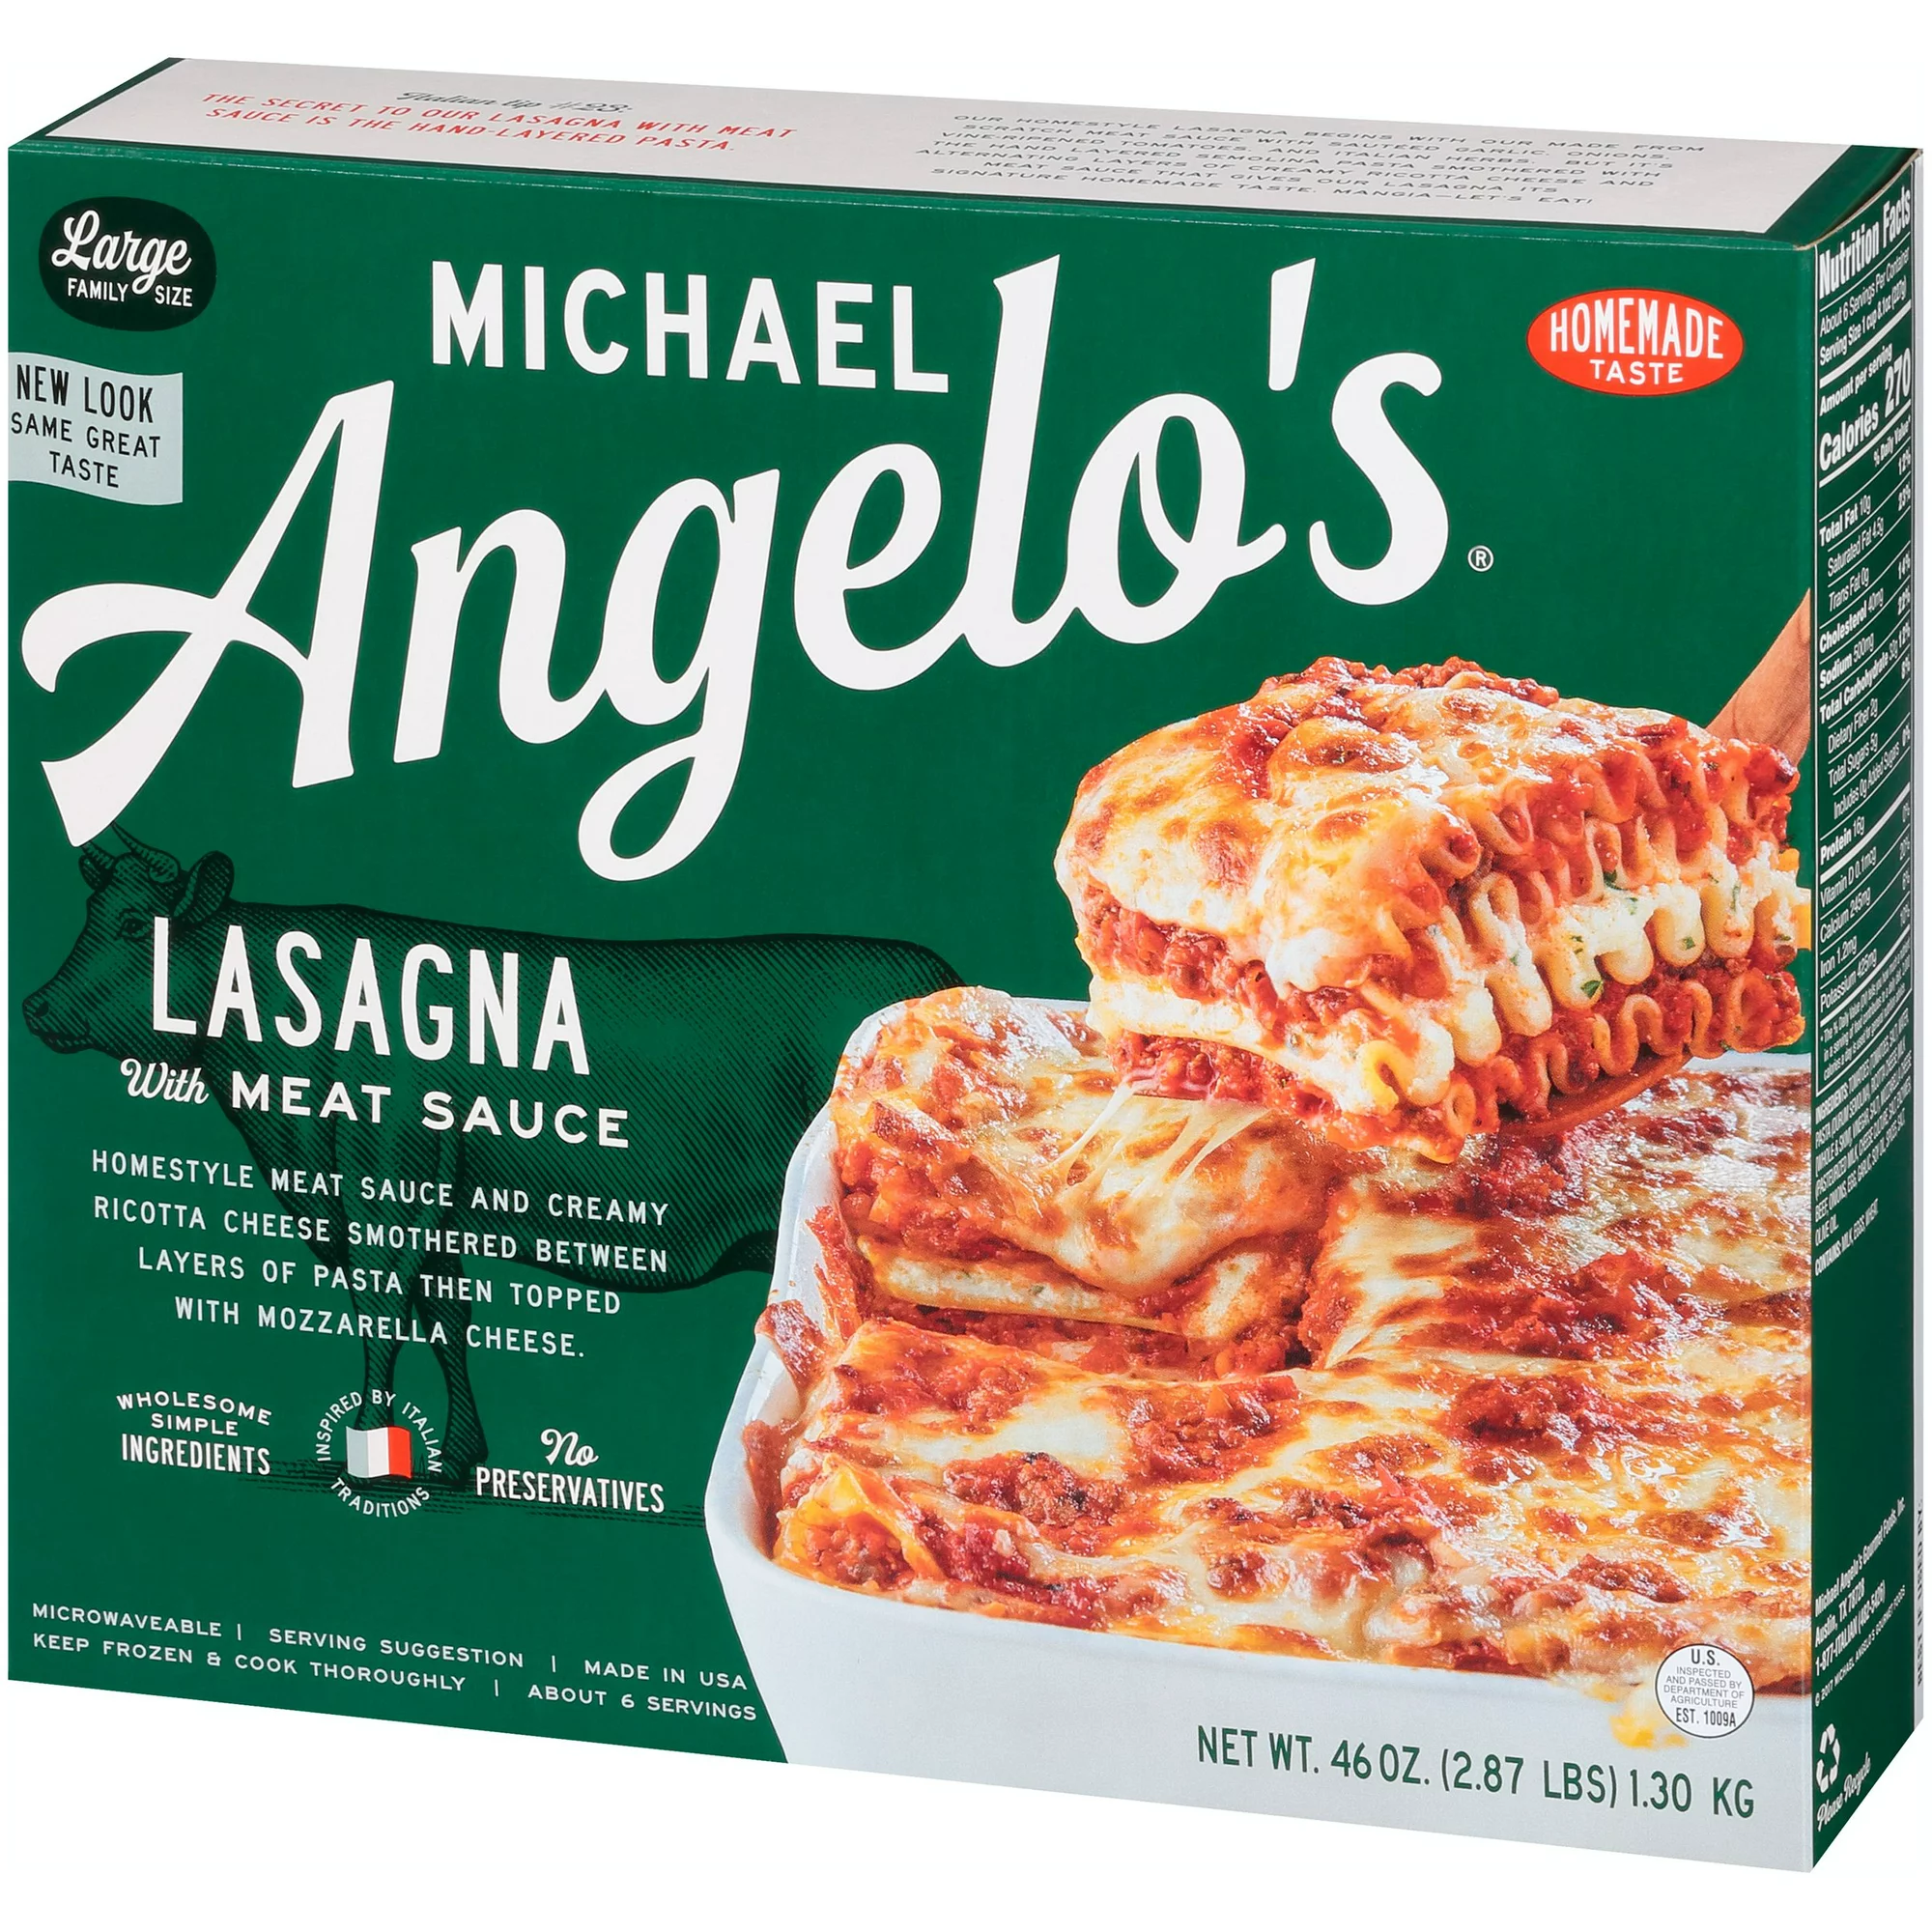 Indulge in mouthwatering savings with $2.00 off on any Michael Angelo's Frozen Entree.